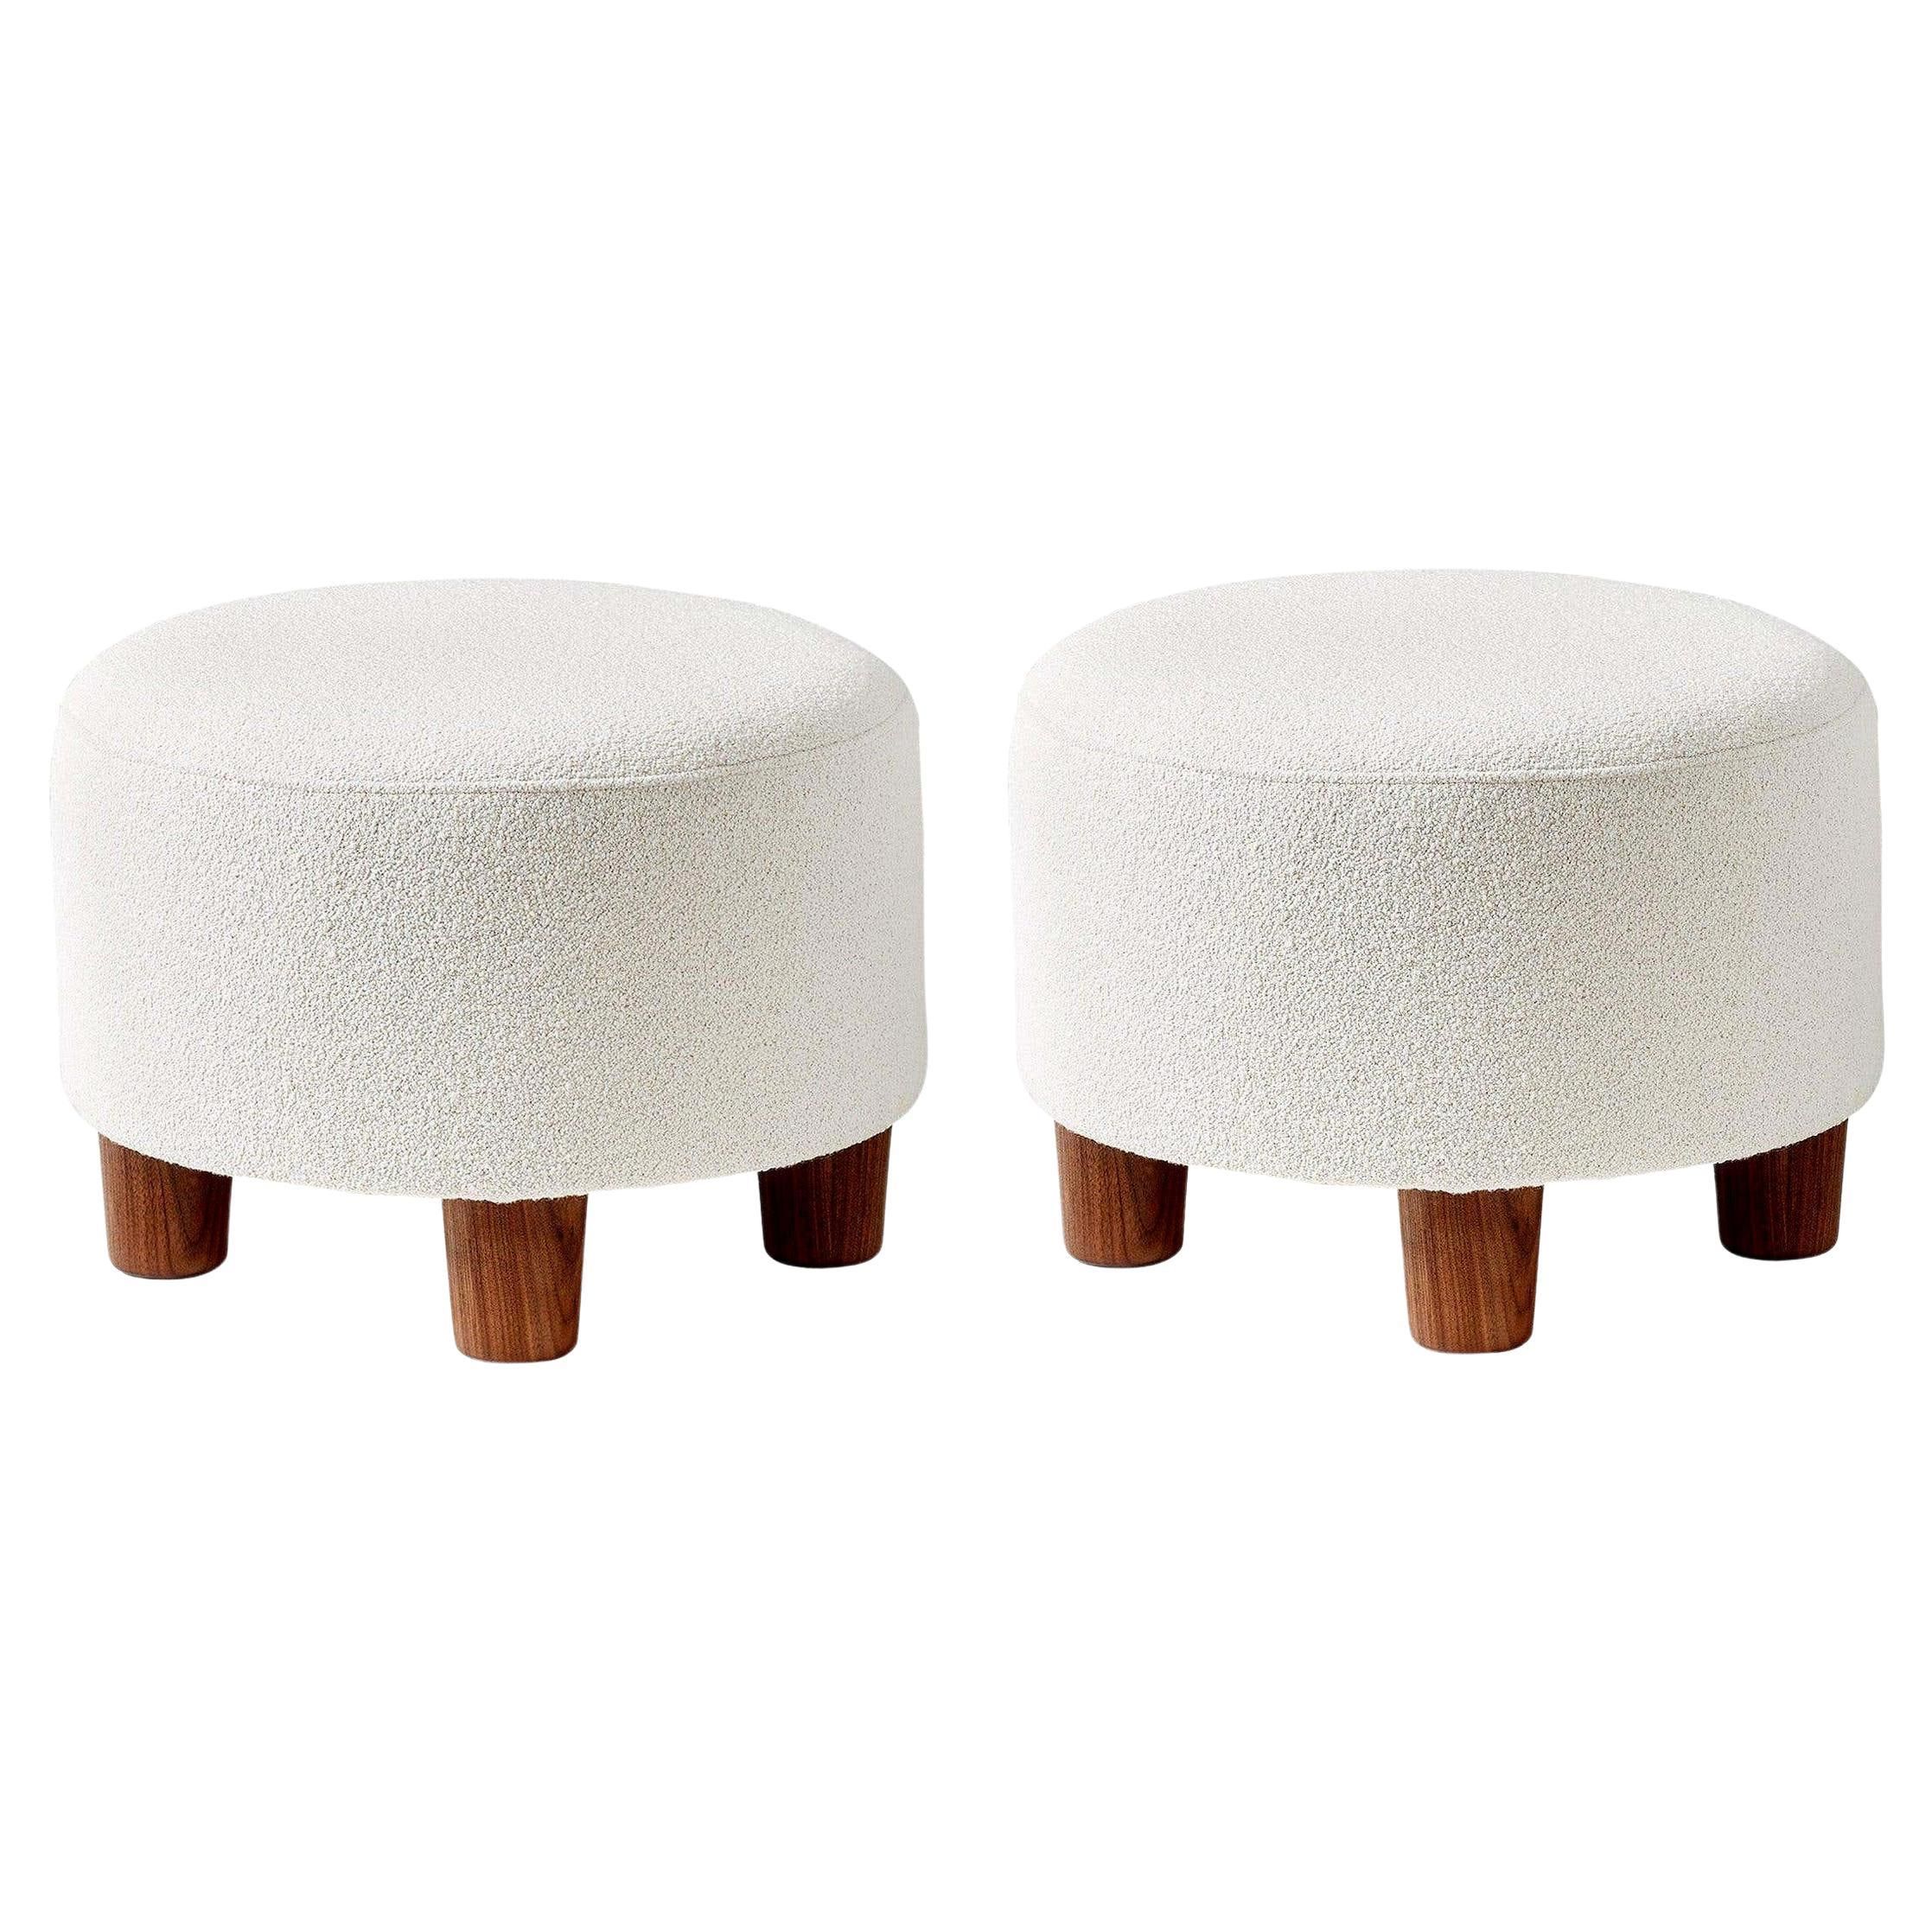 Pair Of Custom Made Round Boucle Ottomans With Walnut Legs For Sale At  1stdibs With Regard To Boucle Ottomans (View 12 of 15)